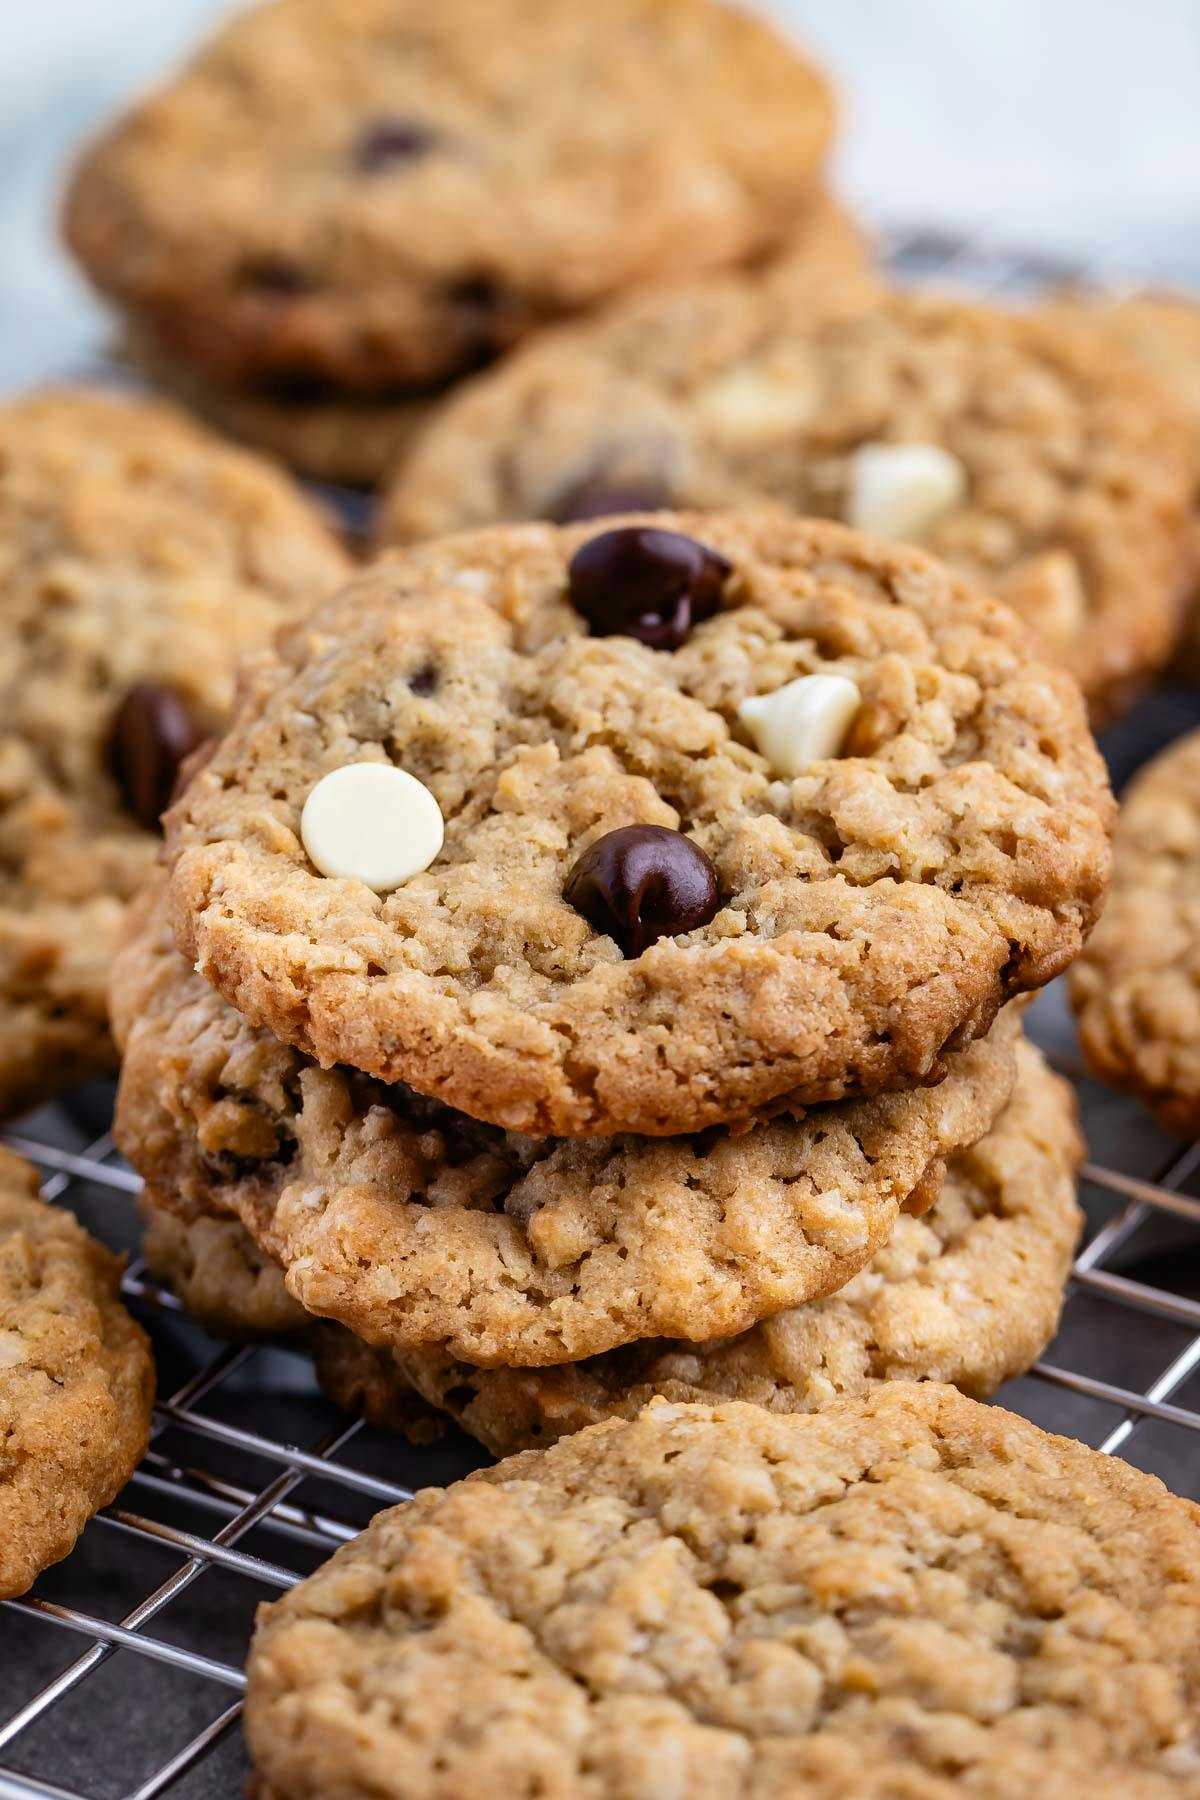 oatmeal cookies with regular and white chocolate chips baked in.